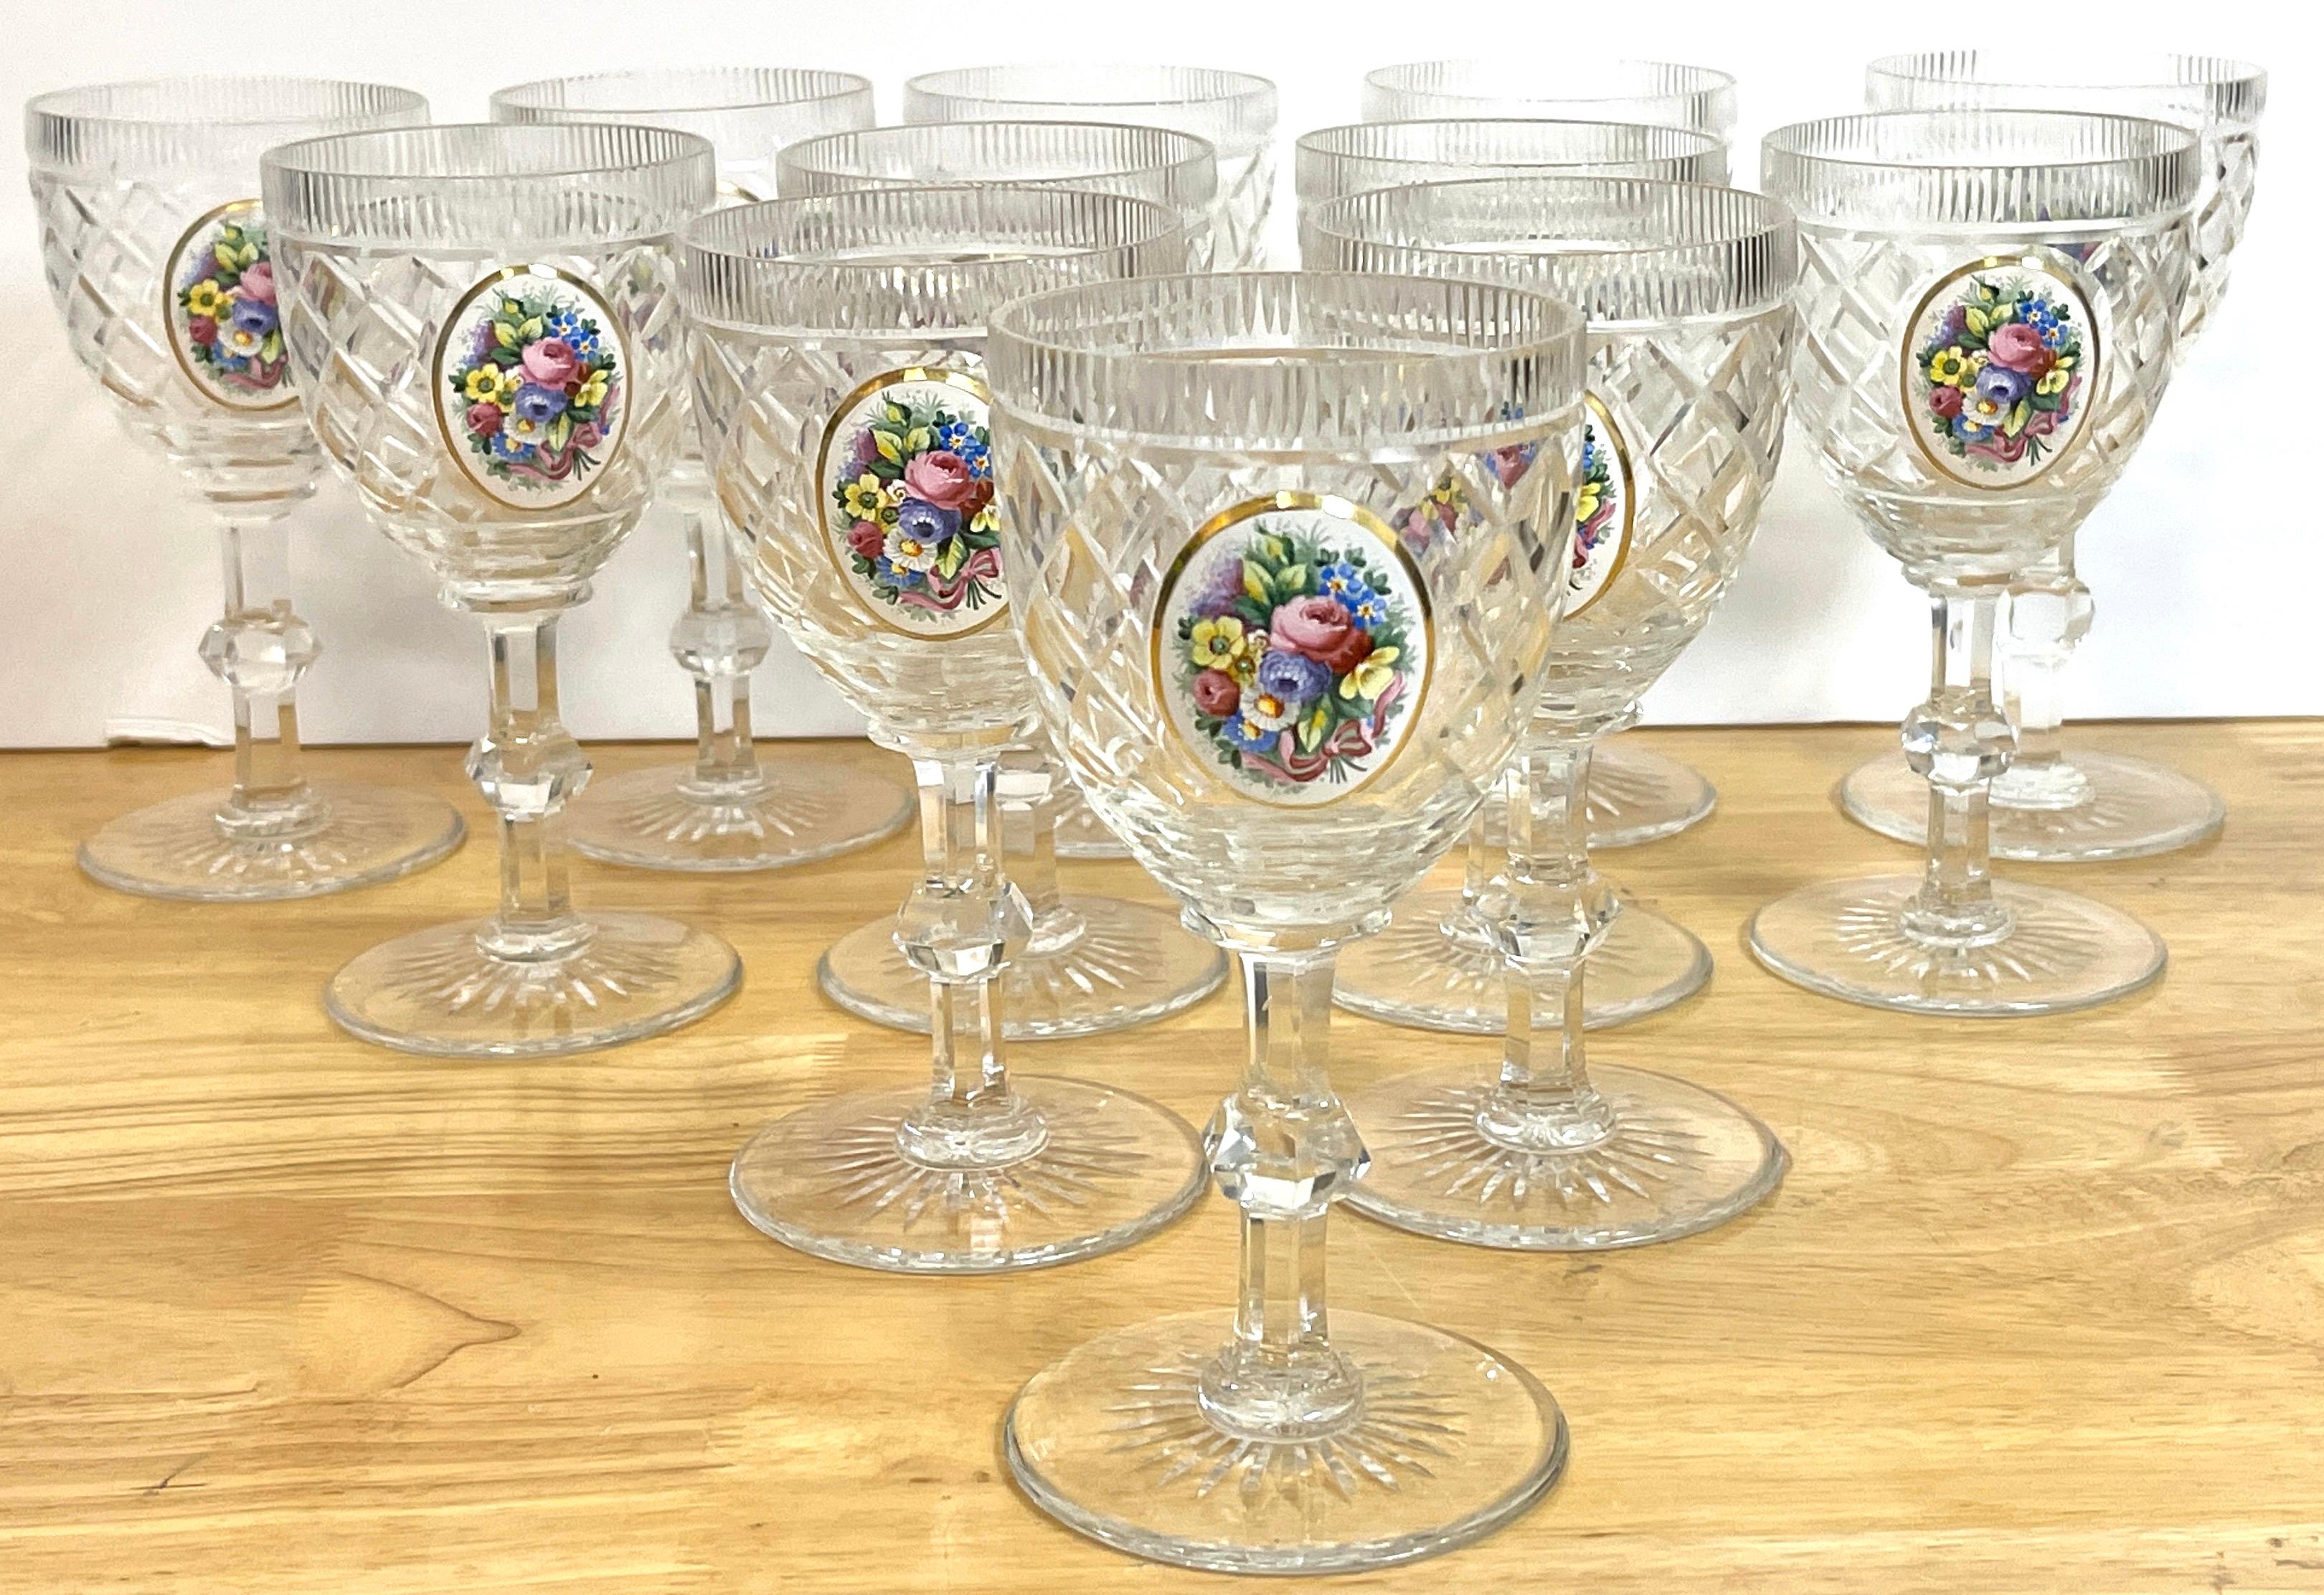 12 Exquisite Moser floral enameled cut to clear enamel water/wine goblets, 
Each one with a fine cross-hatched colorless crystal stems, with an oval enameled floral bouquet. 
Unmarked.
Measures: 7 height x 3.25 /3.25 / 3.75 deep.